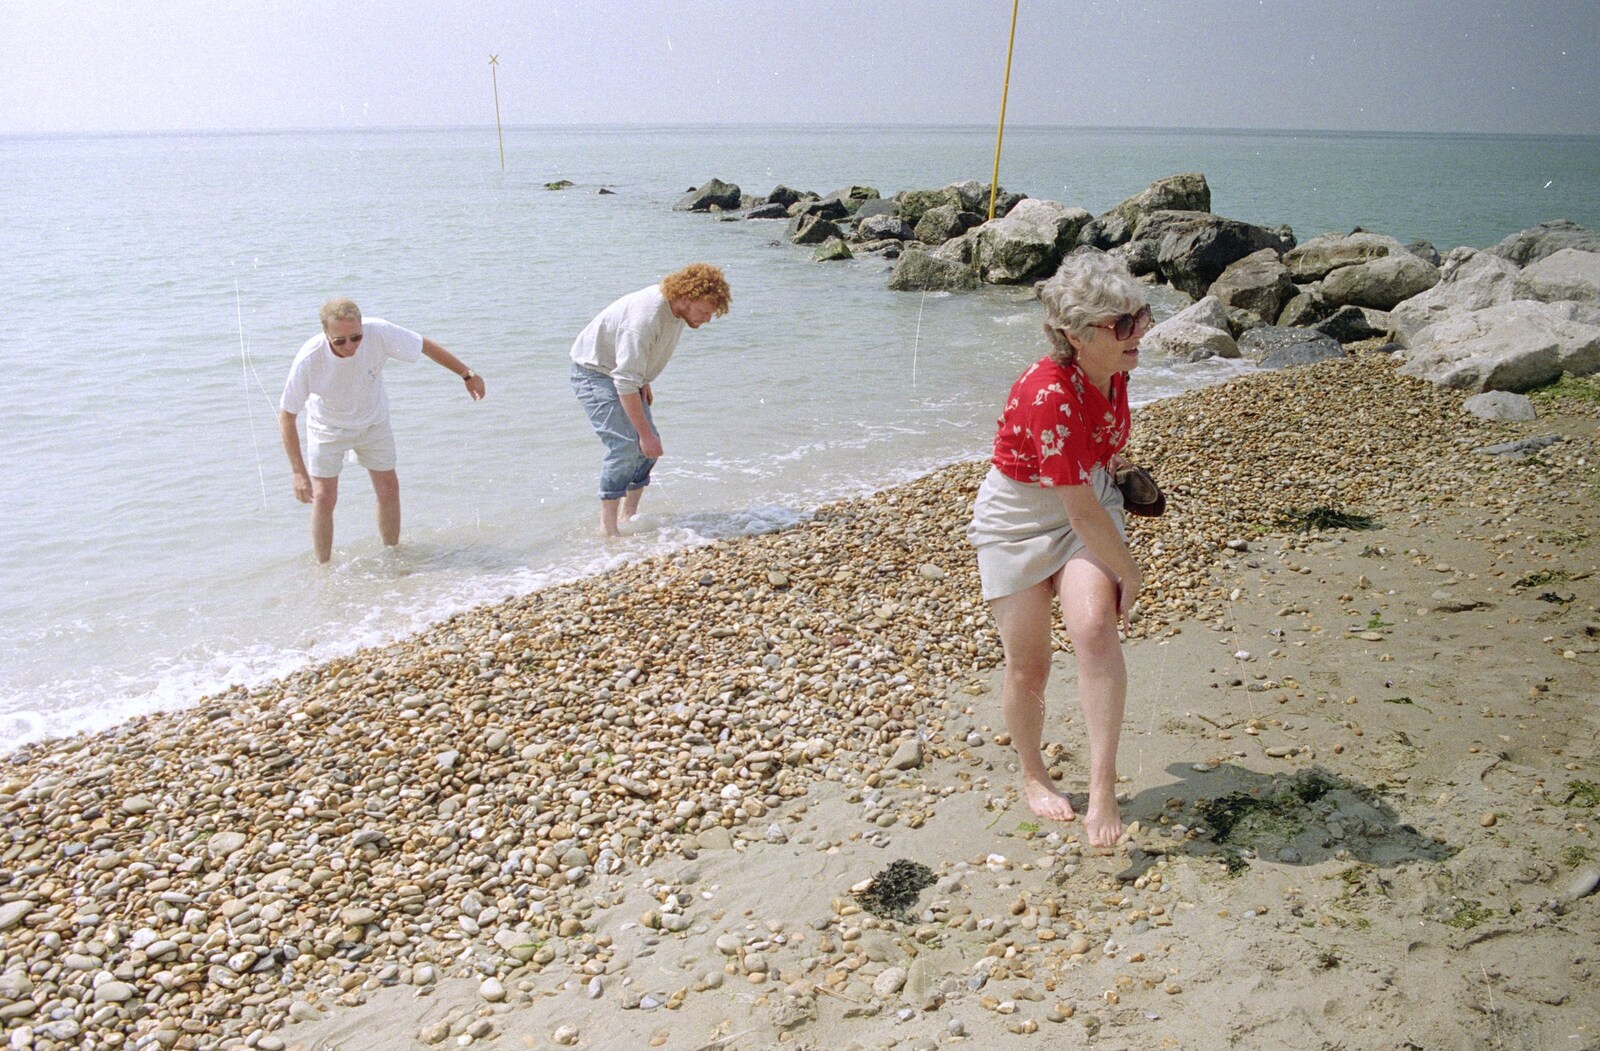 John Willy and Wavy paddle as Spammy legs it from A Brome Swan Trip to Wimereux, France - 20th June 1996